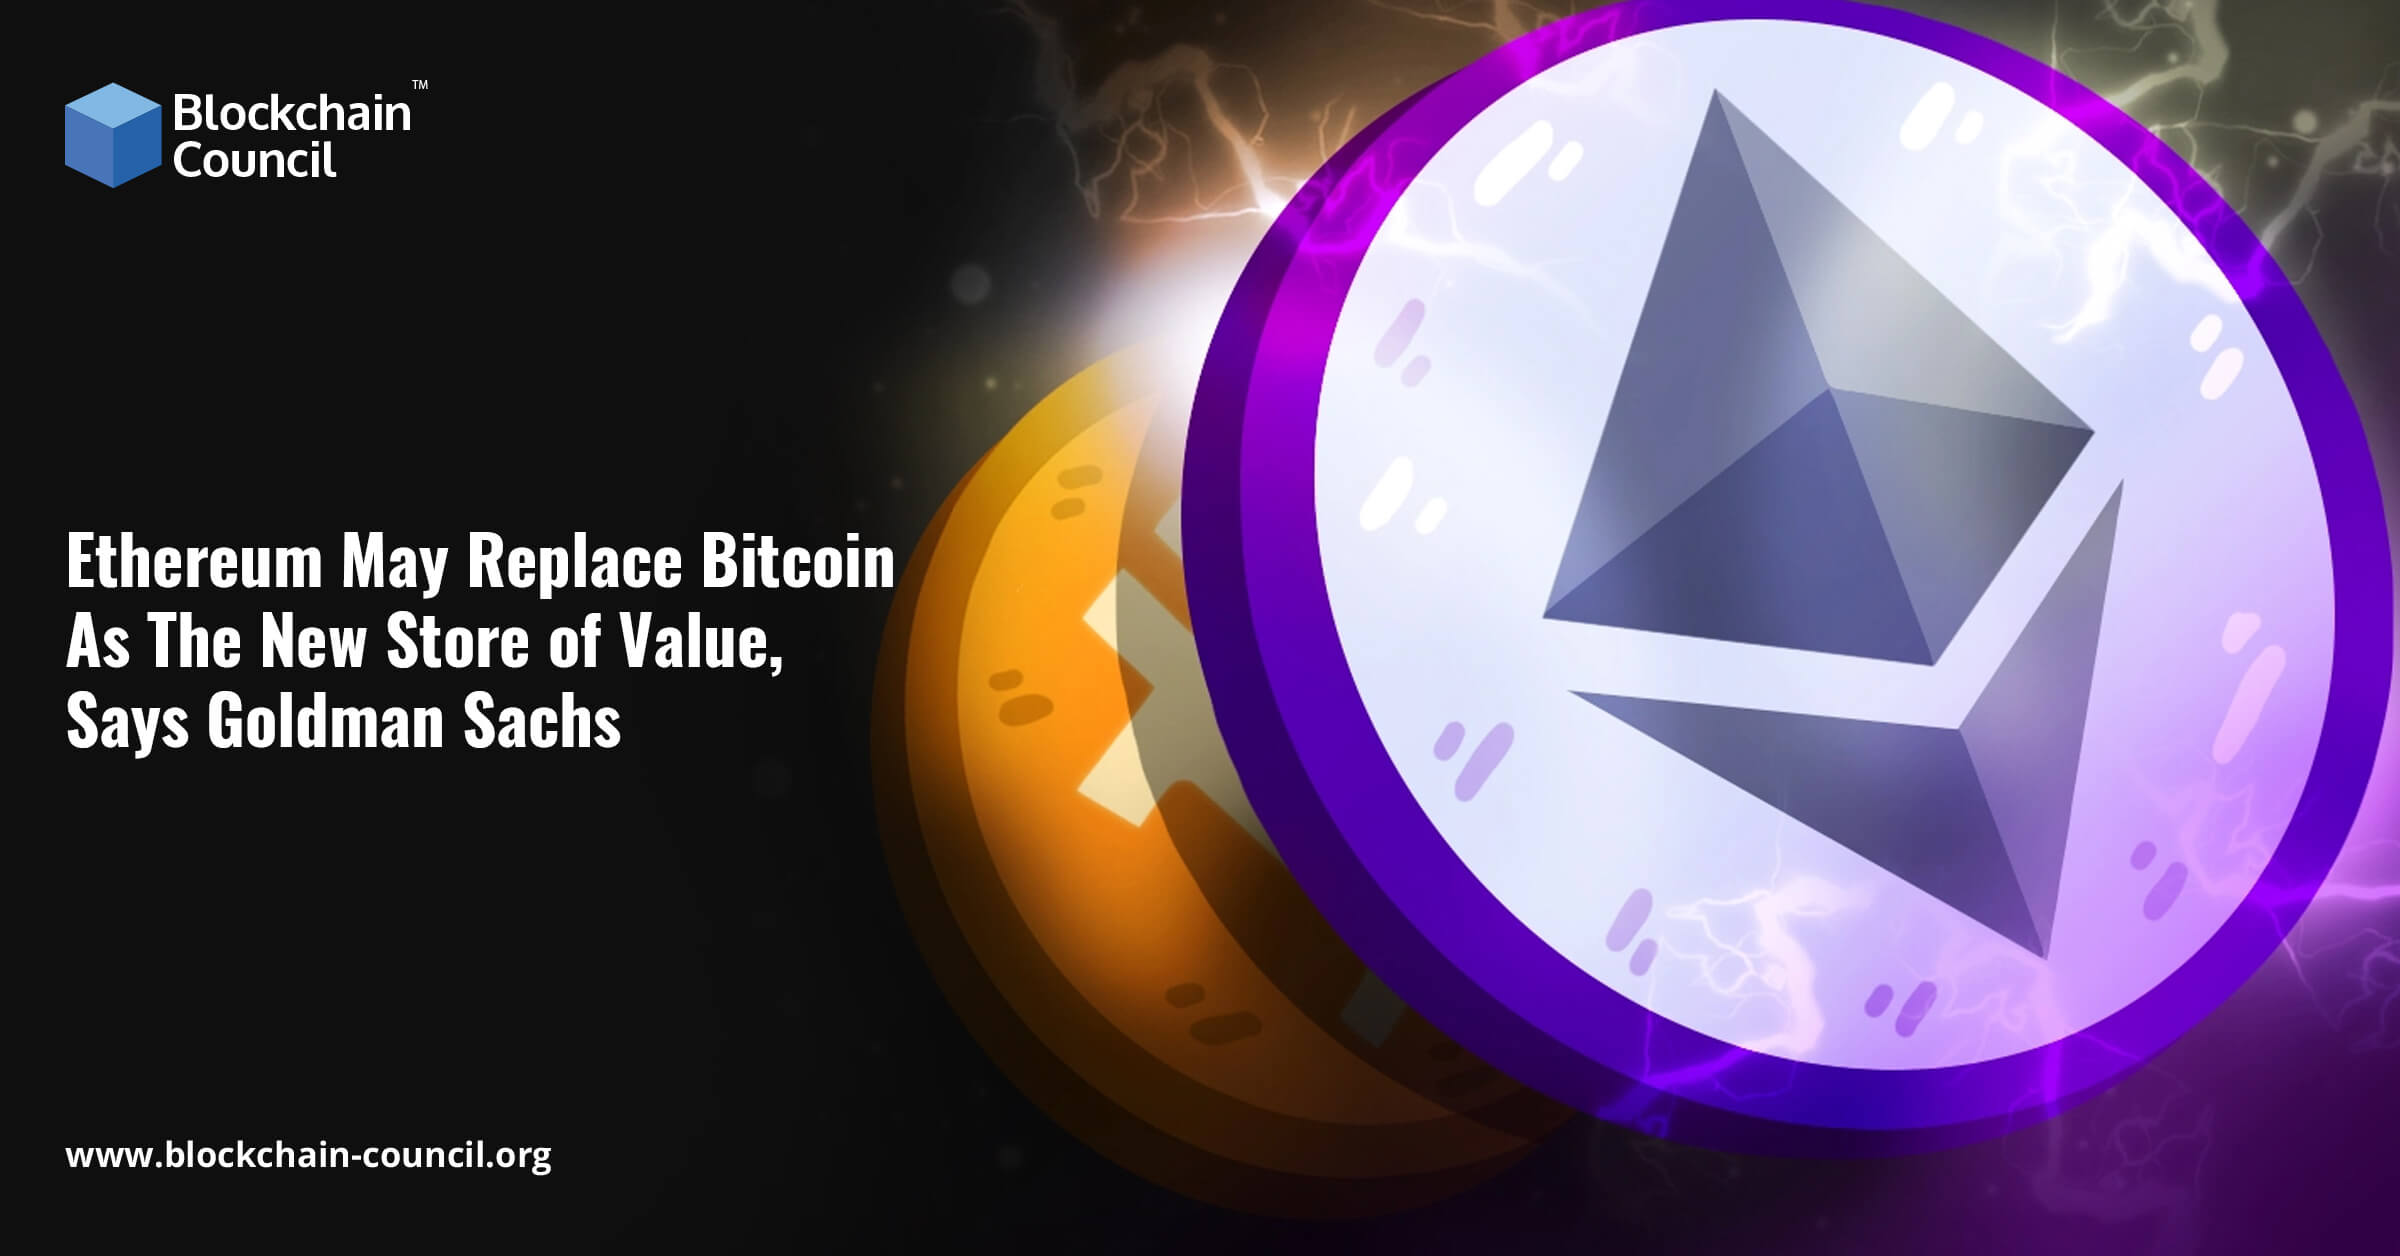 Ethereum May Replace Bitcoin As The New Store of Value, Says Goldman Sachs